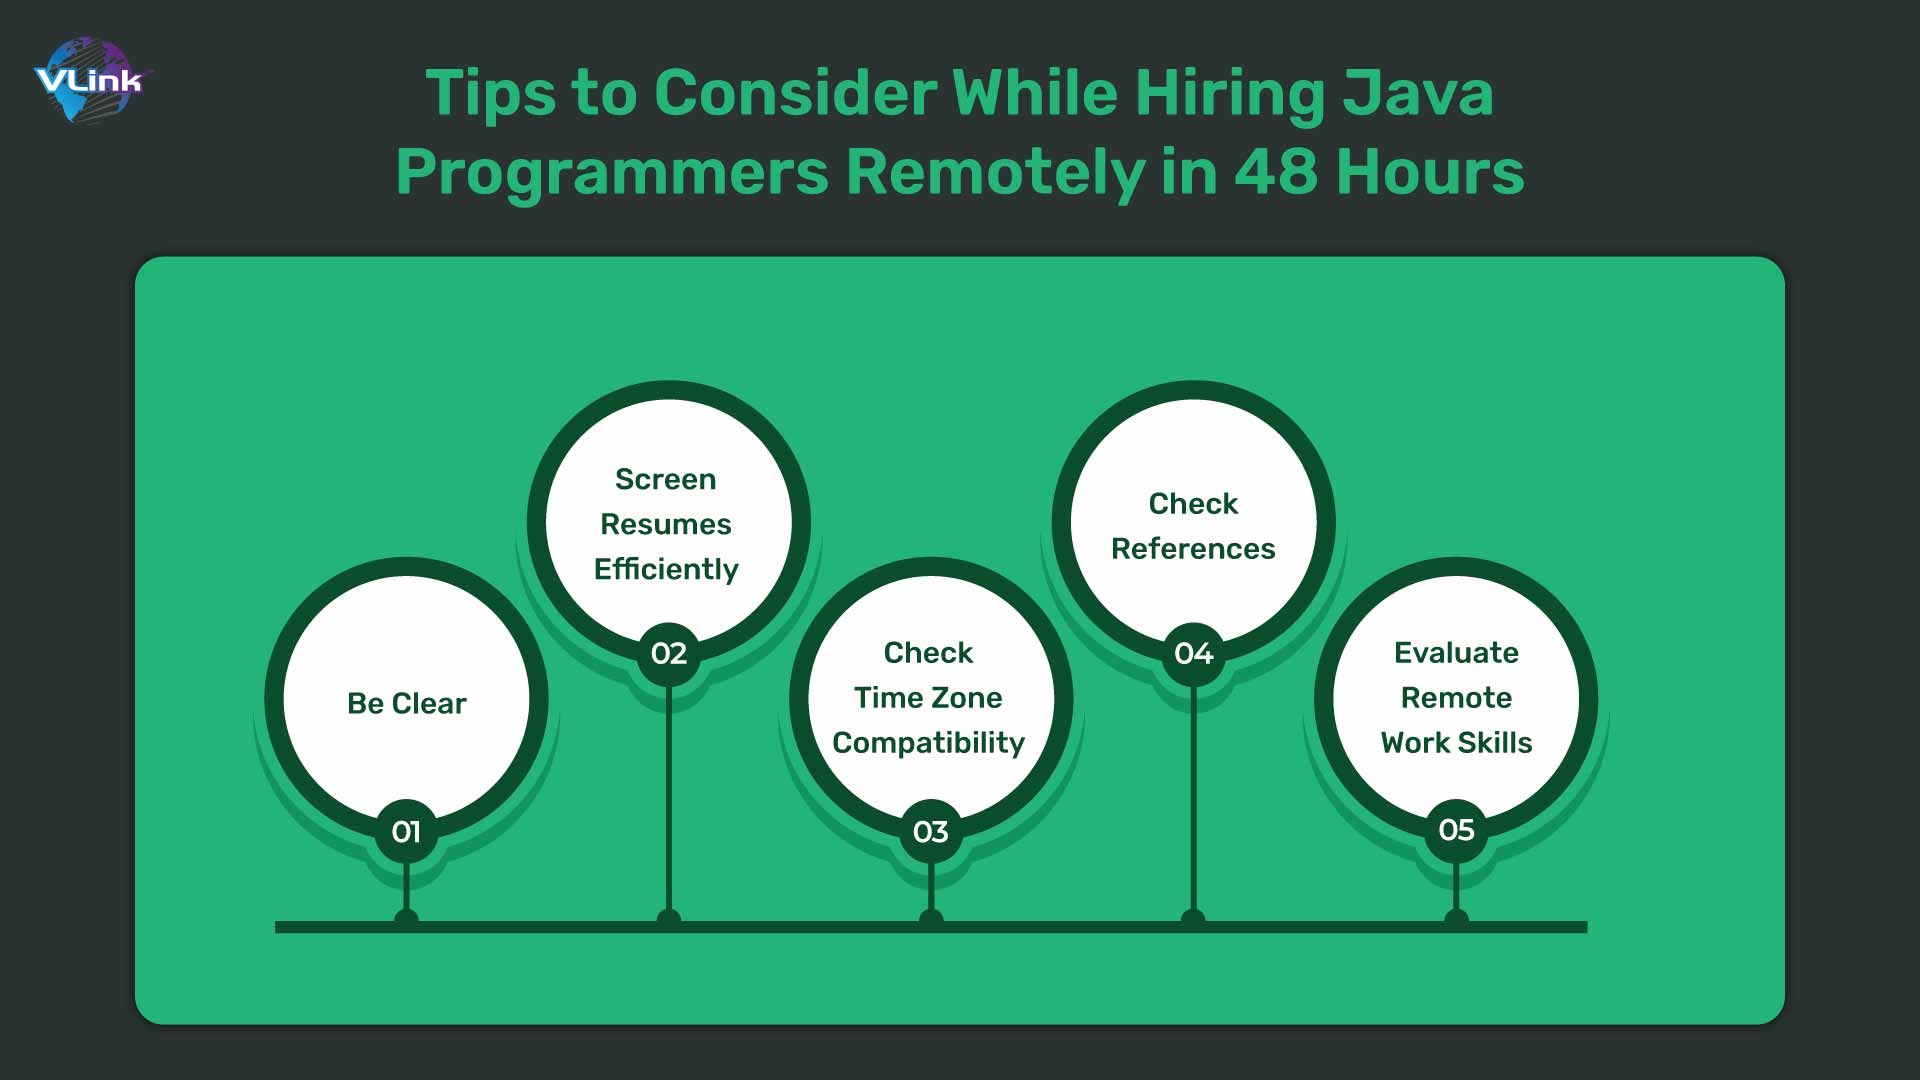 Tips to Consider While Hiring Java Programmers Remotely in 48 Hours